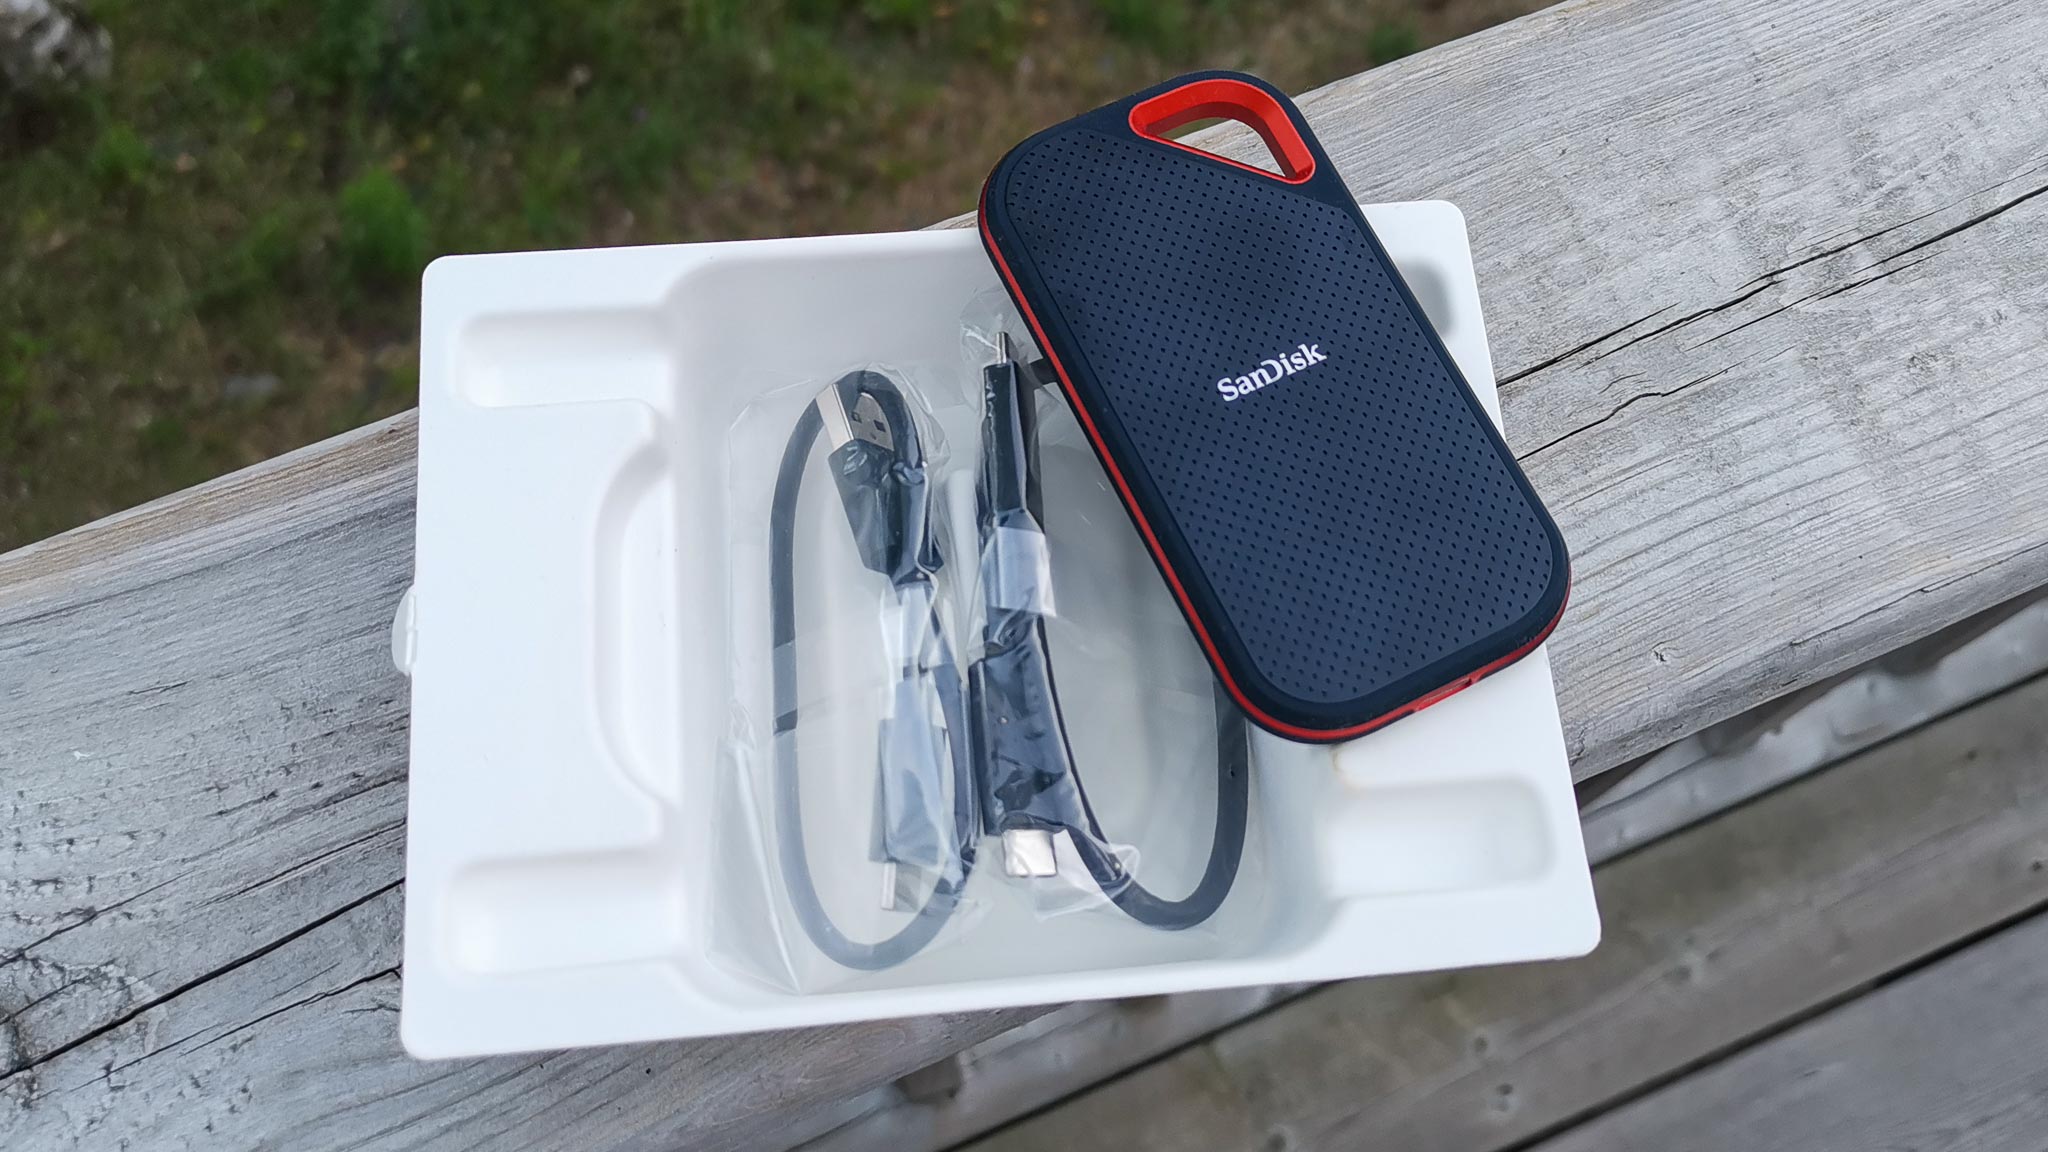 Sandisk Extreme Pro Portable Ssd Review 1tb The Ssd Review